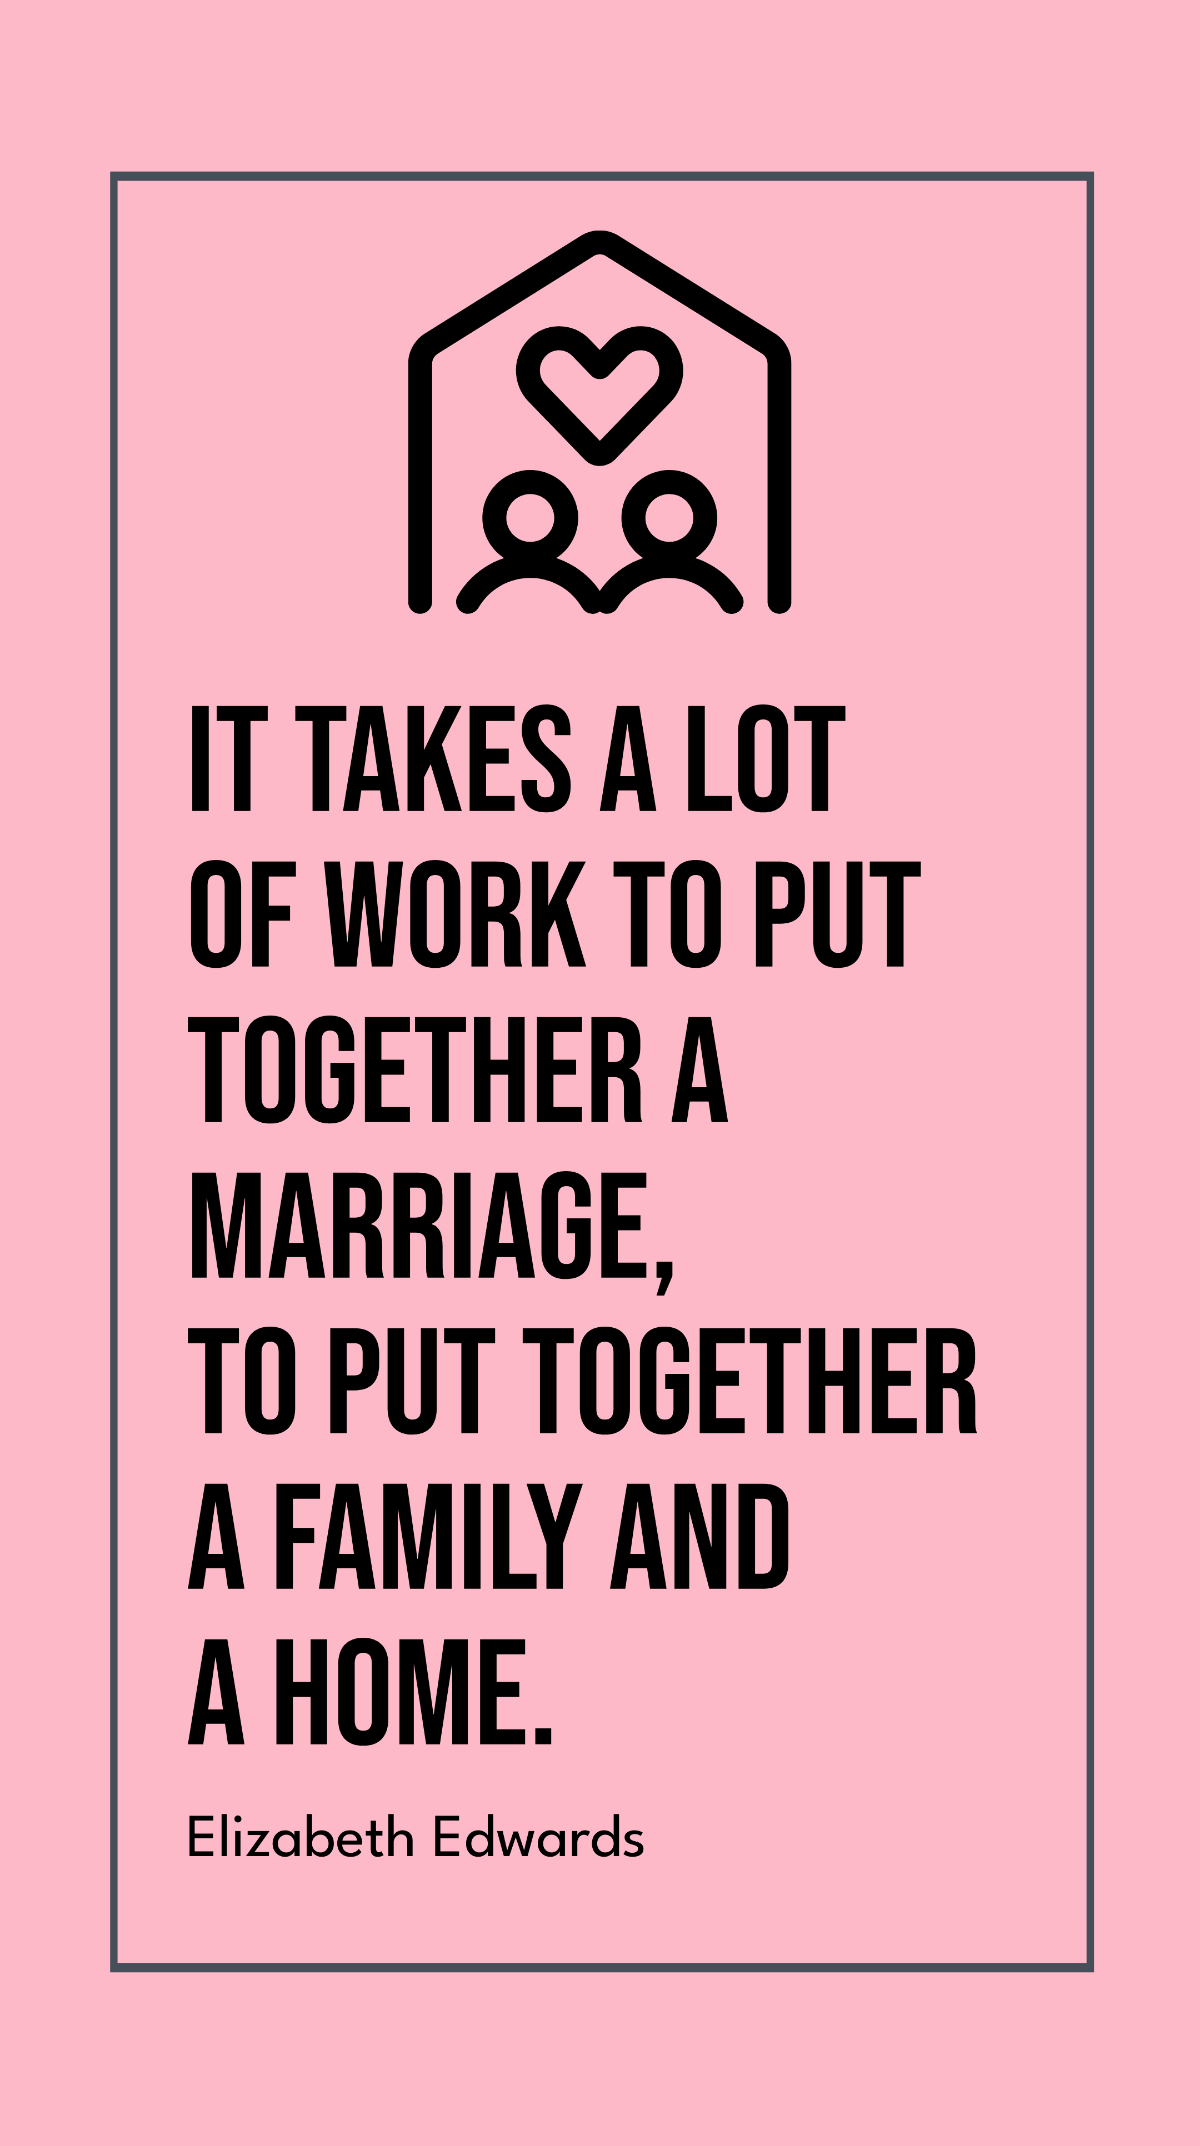 Elizabeth Edwards - It takes a lot of work to put together a marriage, to put together a family and a home. Template